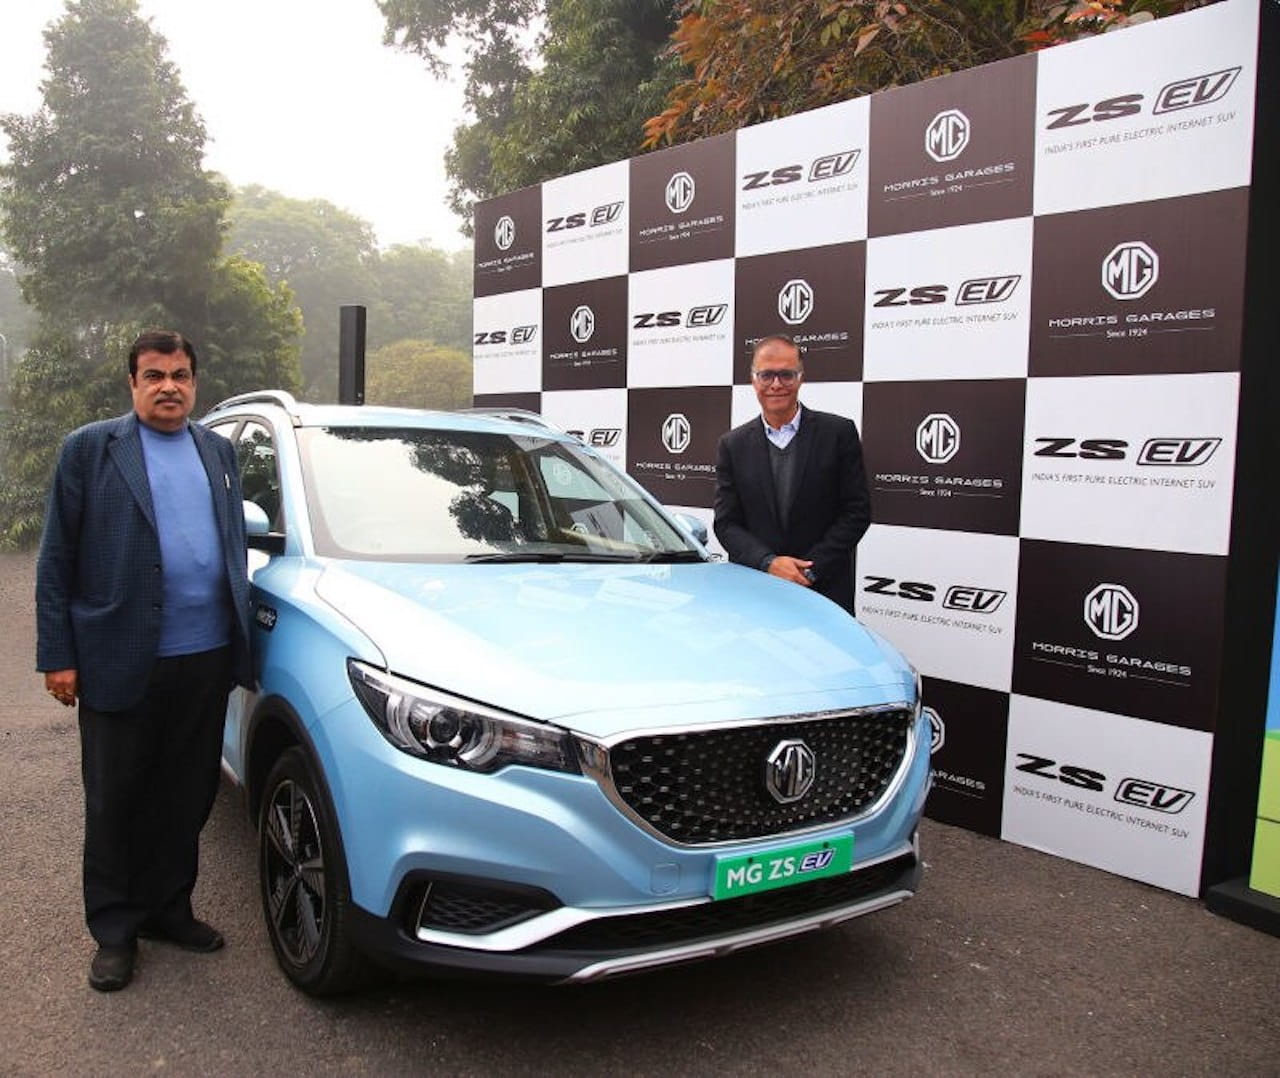 Almost 6,000 EVs sold in Delhi after Delhi Electric Vehicle Policy launch